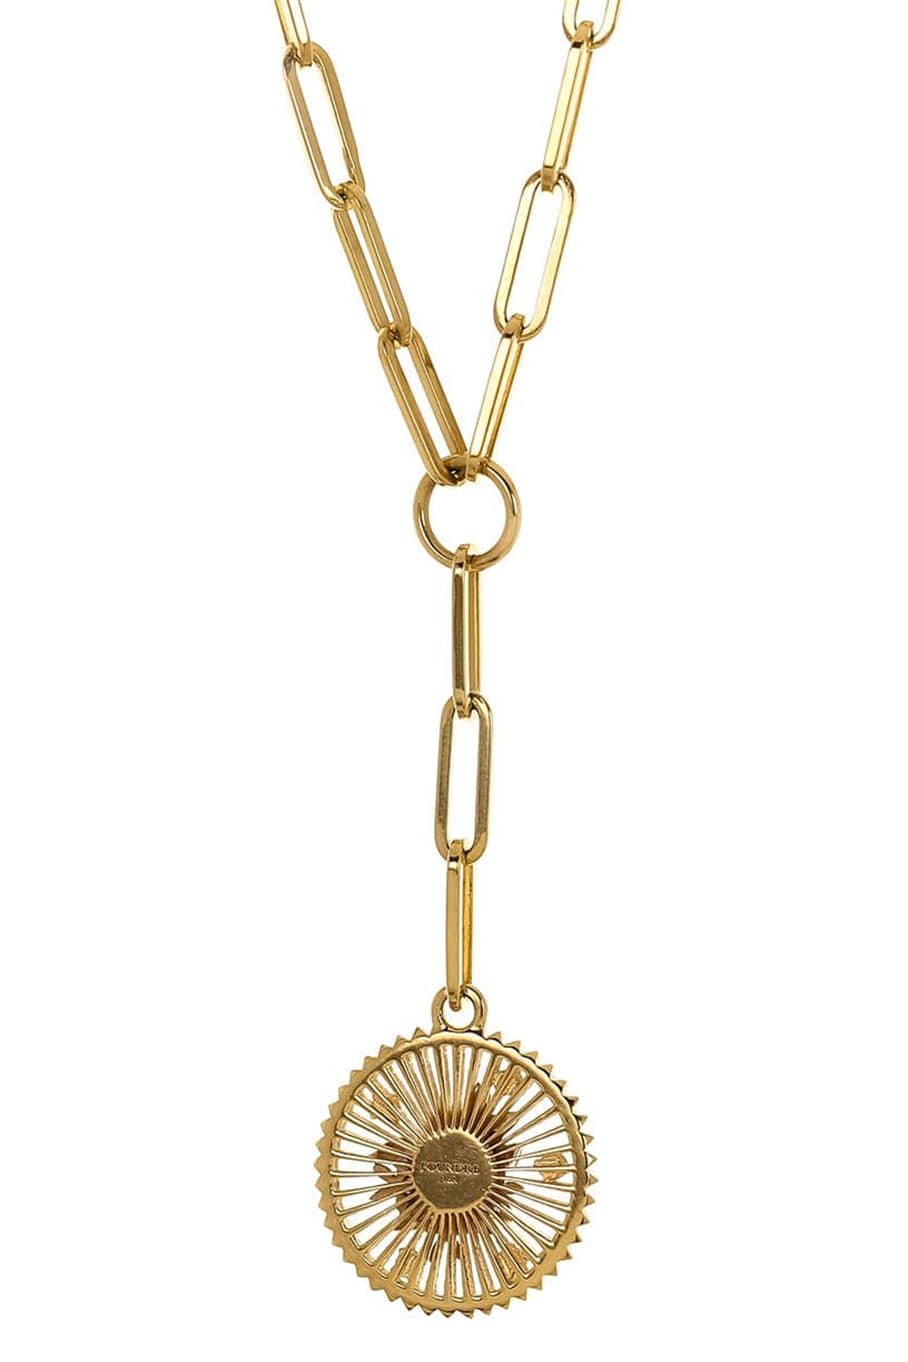 FOUNDRAE-Classic Fob Resilience Necklace-YELLOW GOLD